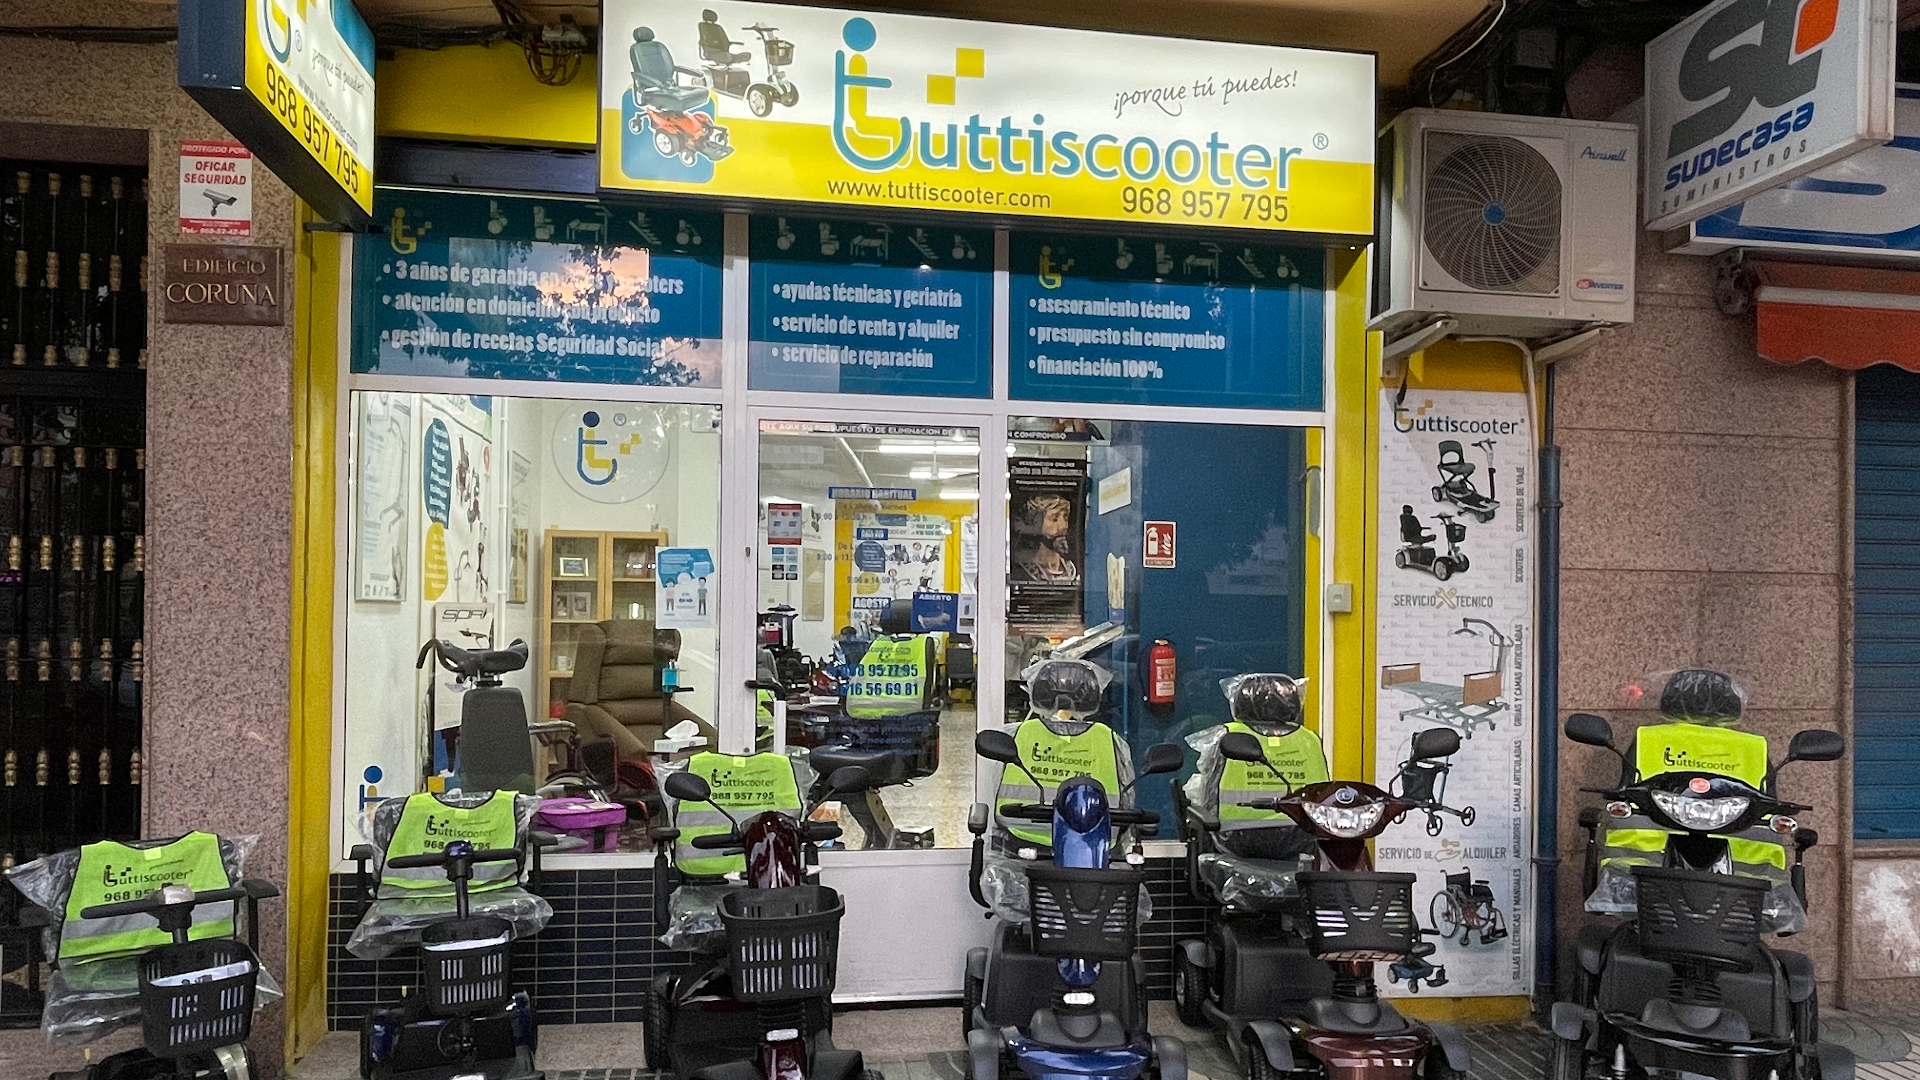 Tuttiscooter